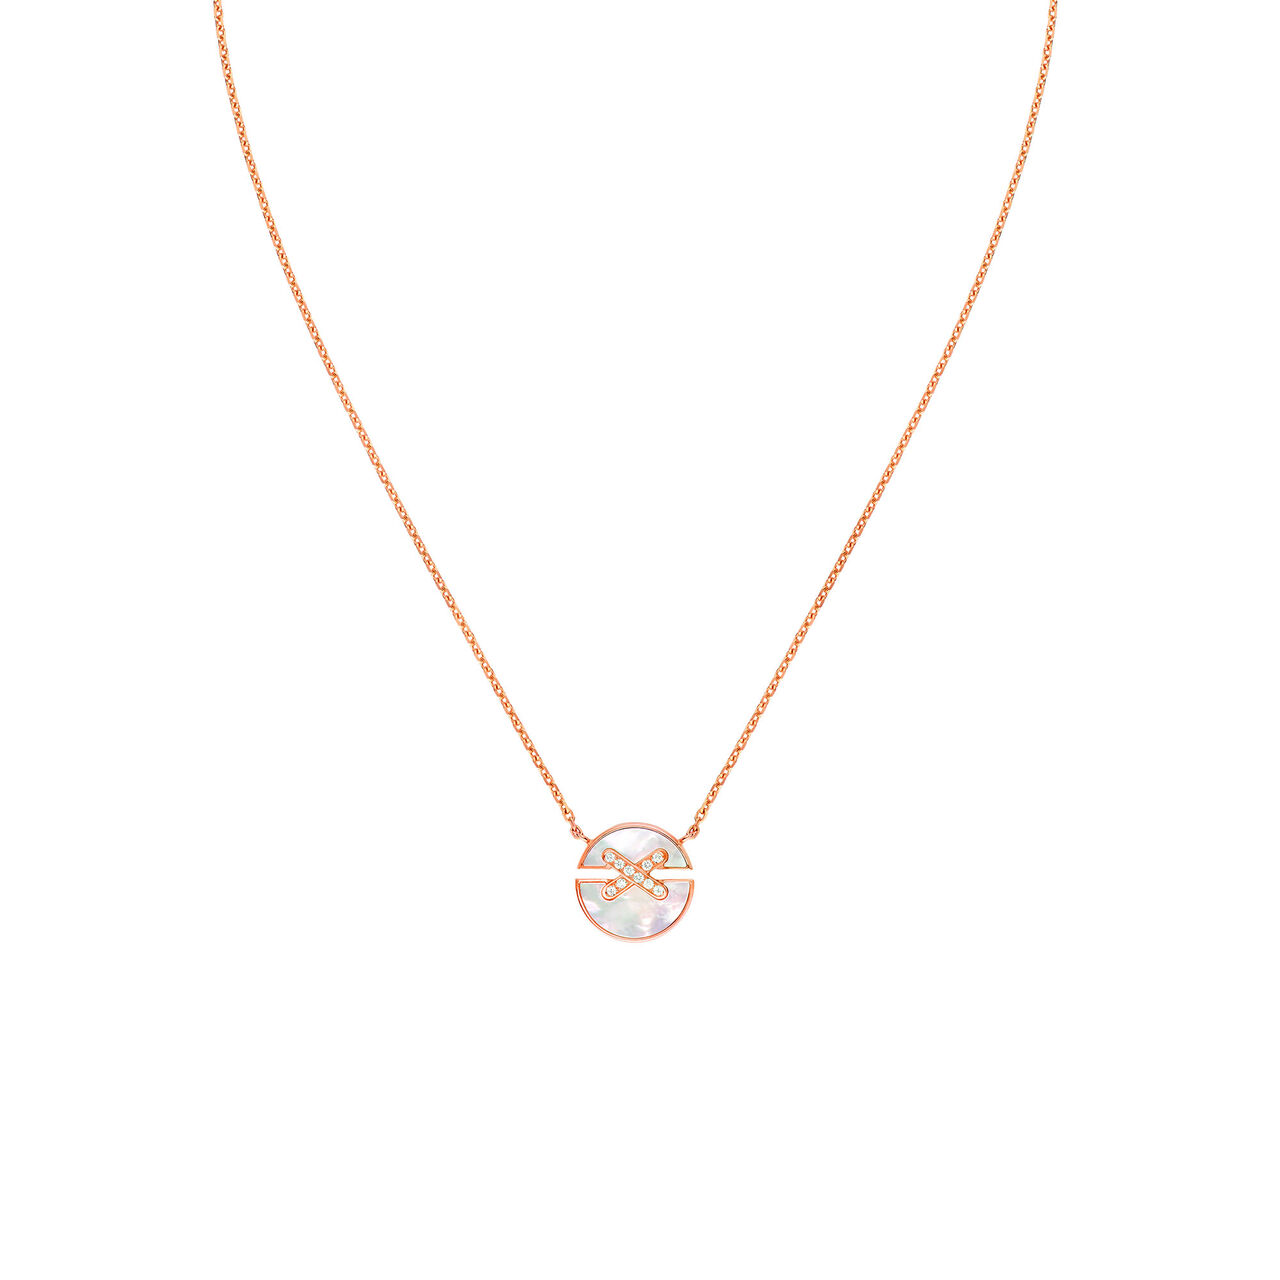 maison birks chaumet jeux de liens harmony small rose gold mother of pearl diamond necklace 084220 image number 0